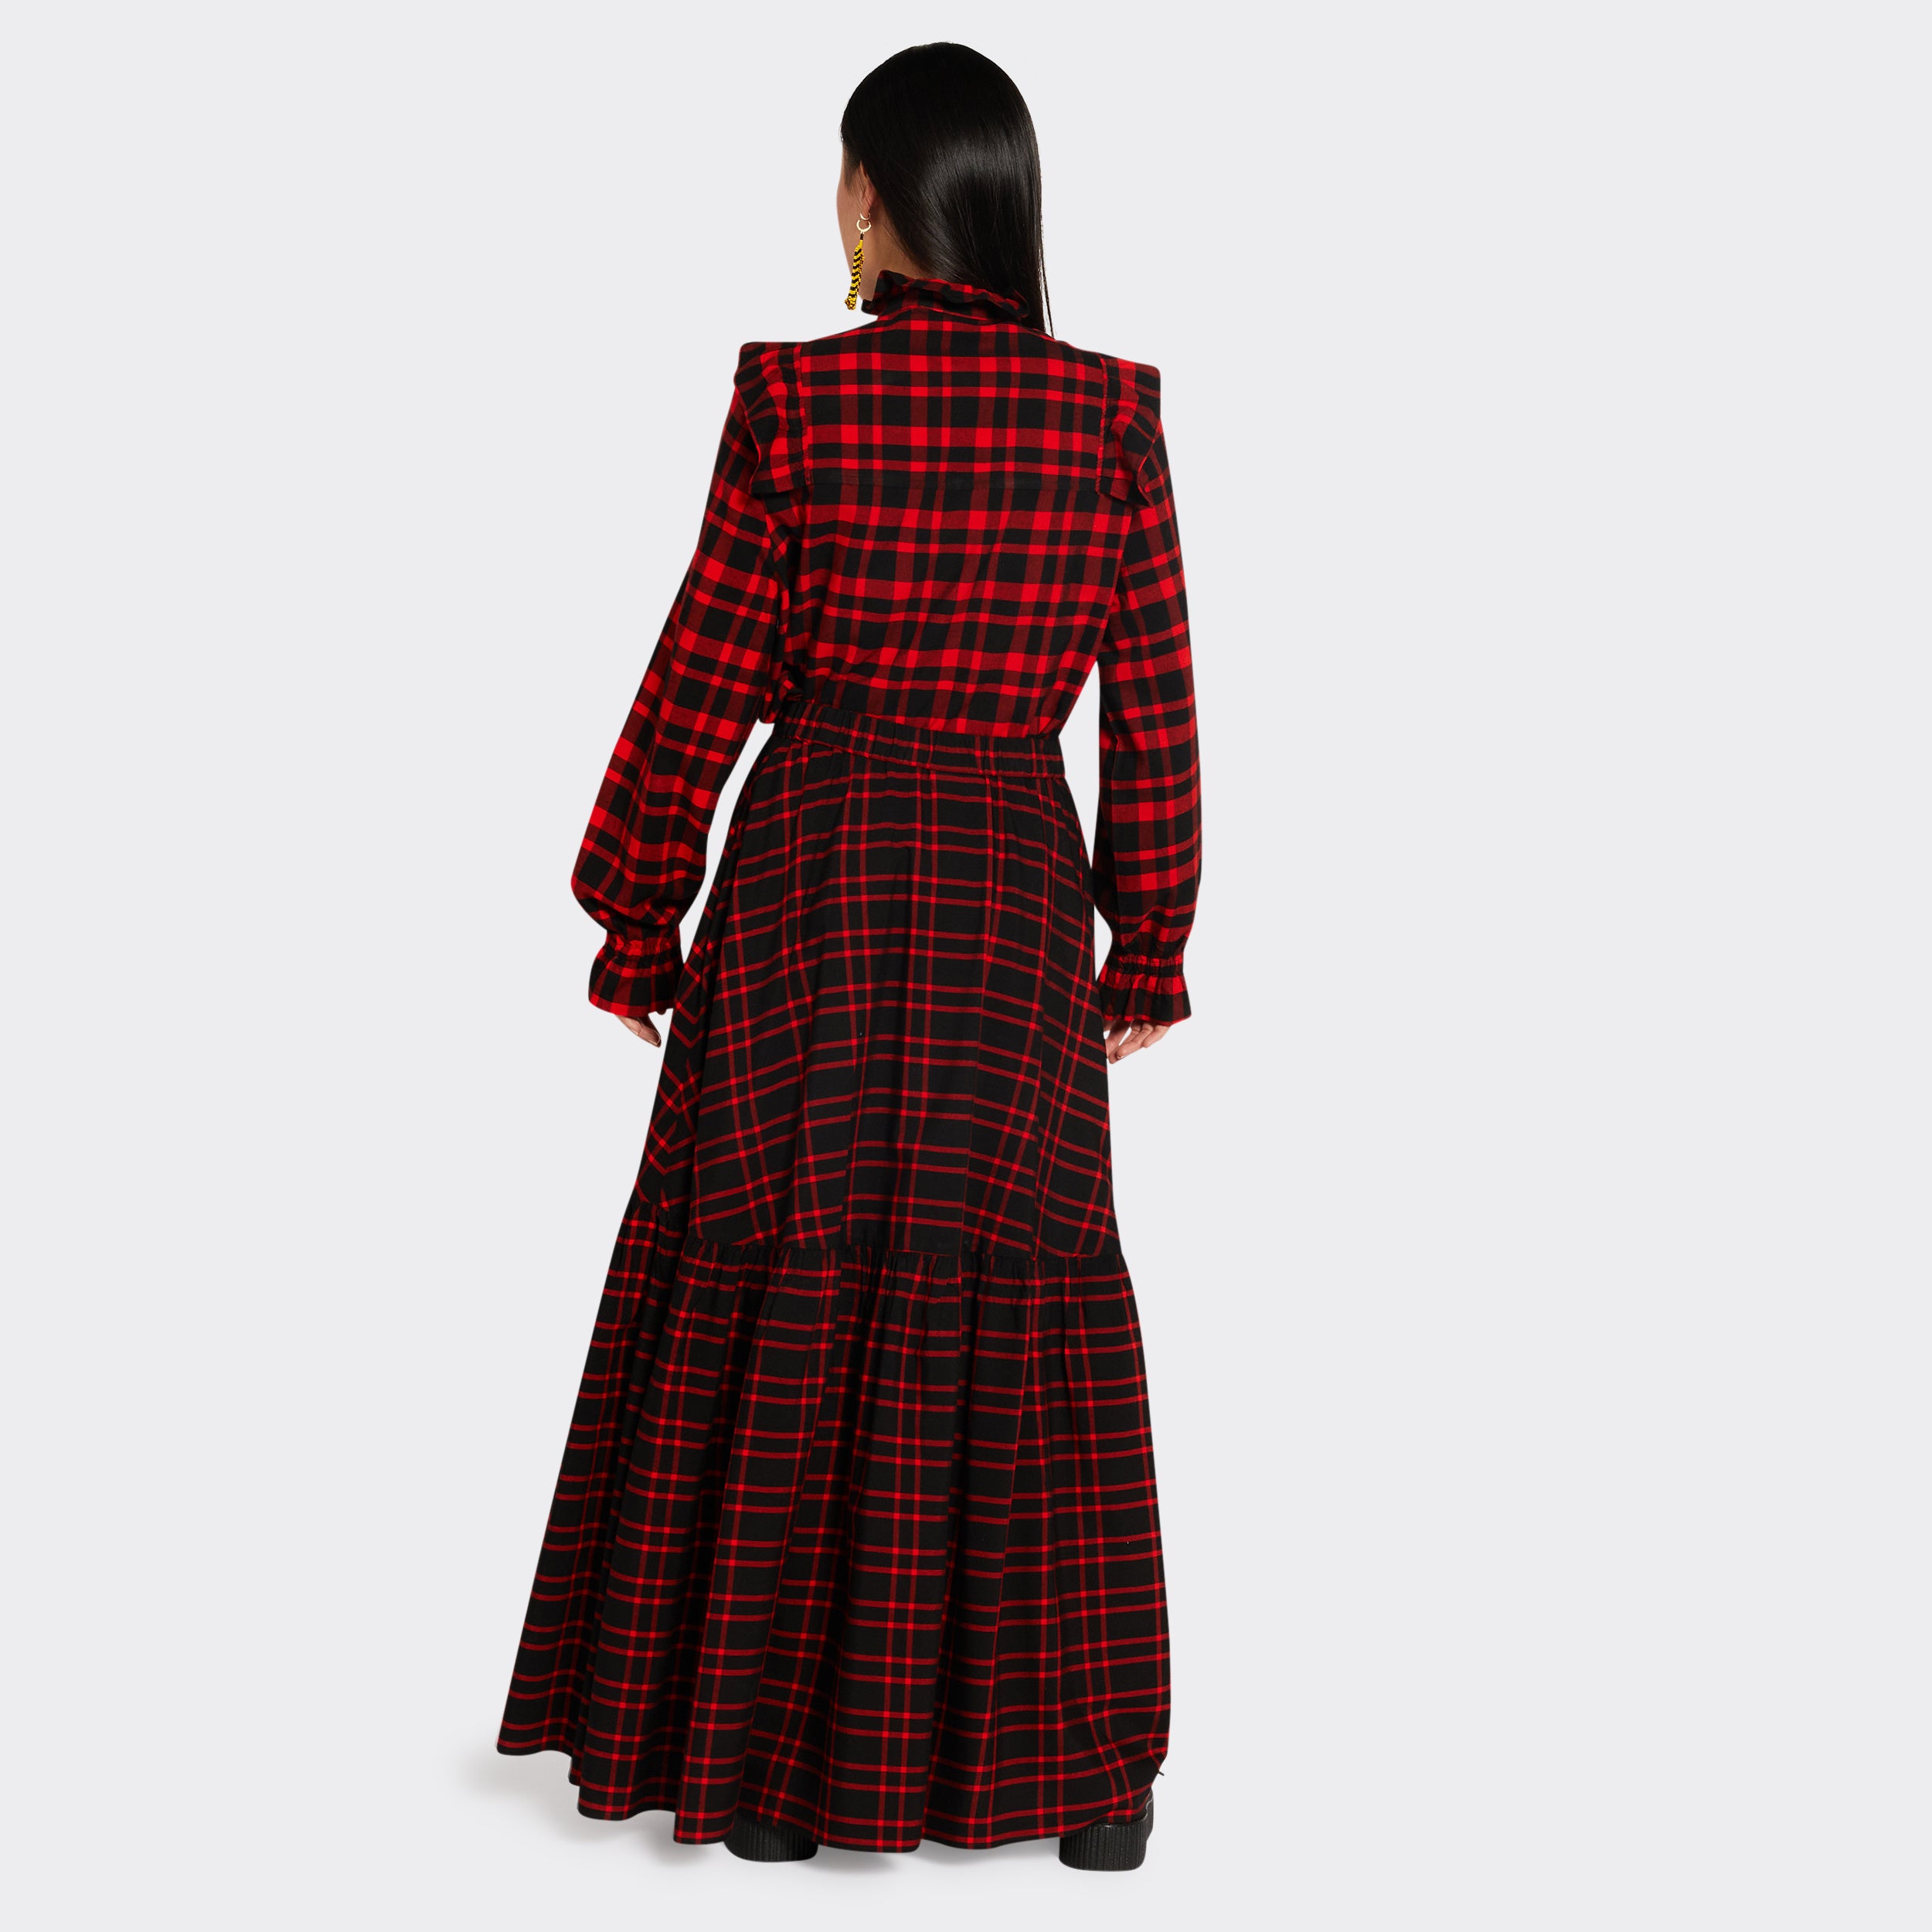 Black maxi skirt in Maasai fabric with red checks on model seen from the back